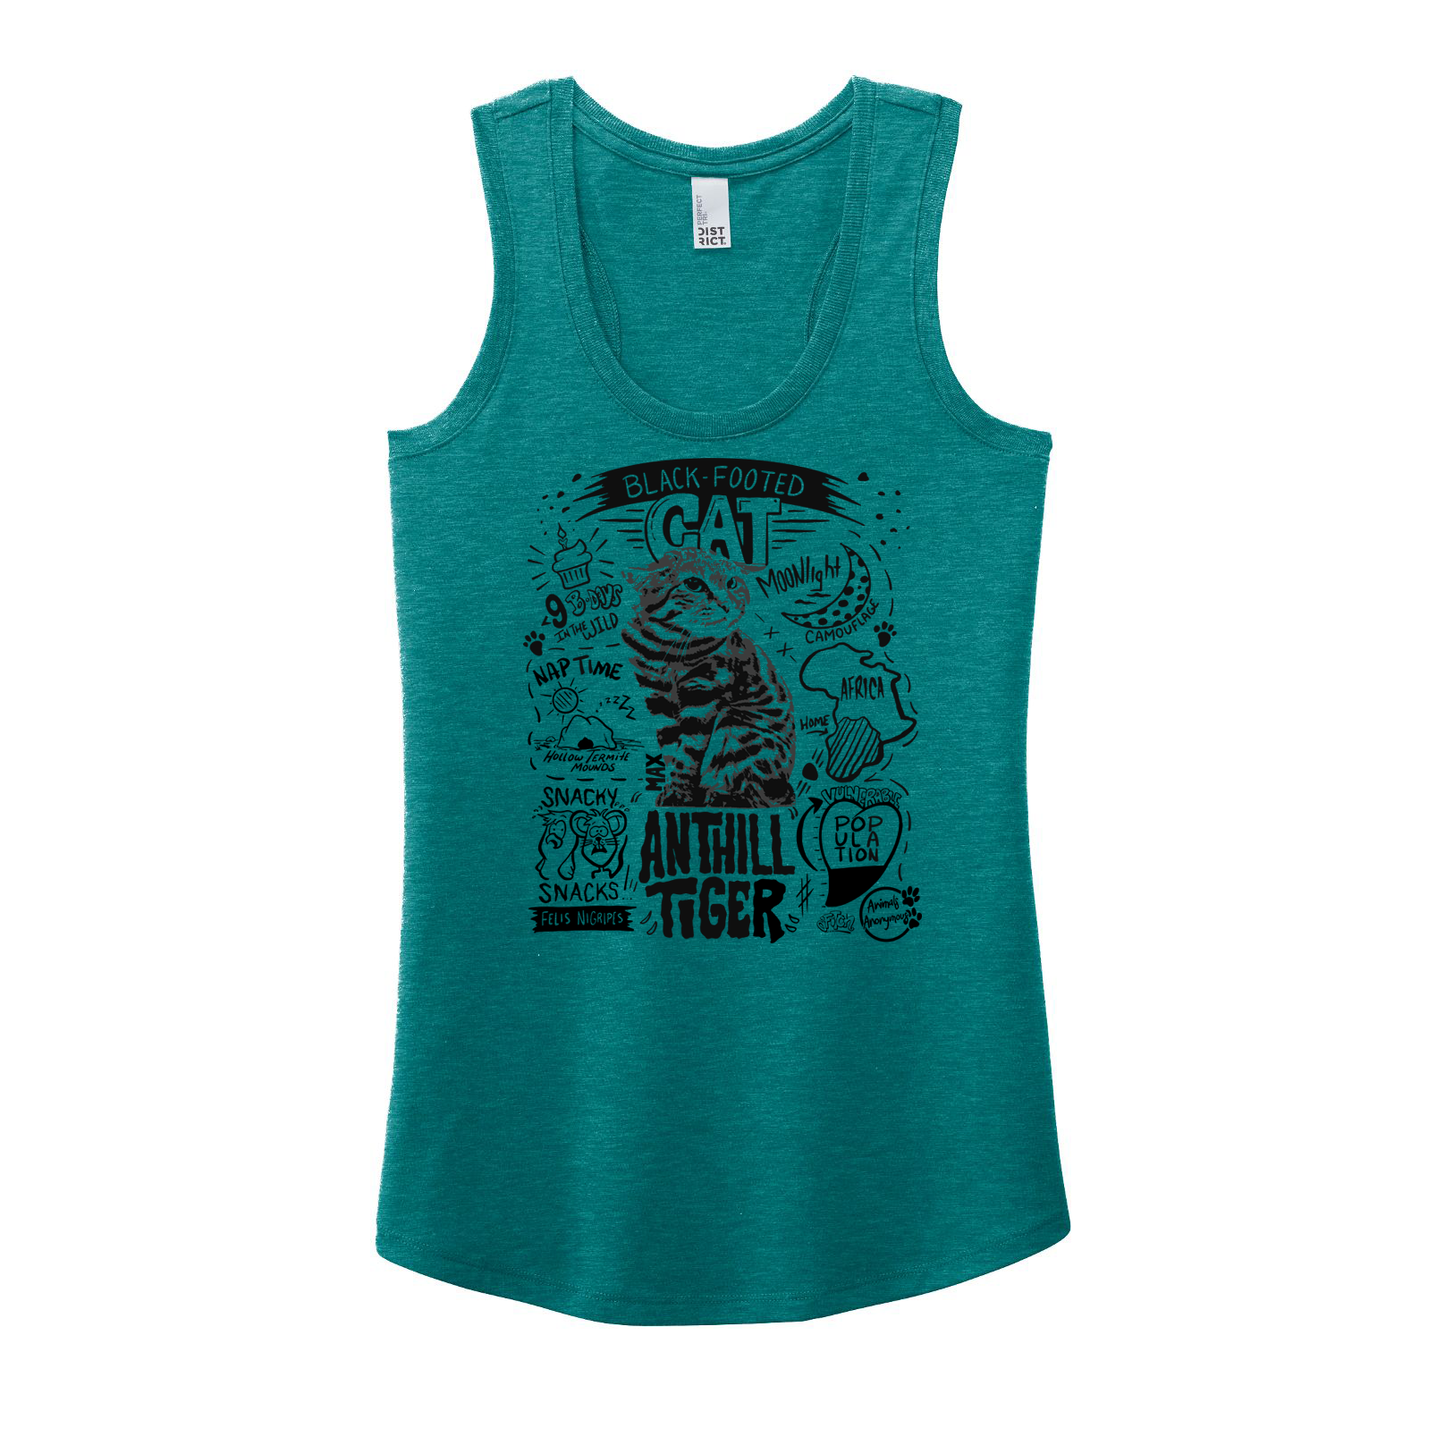 Black Footed Cat Fundraiser - Women's Tank (Pre order)